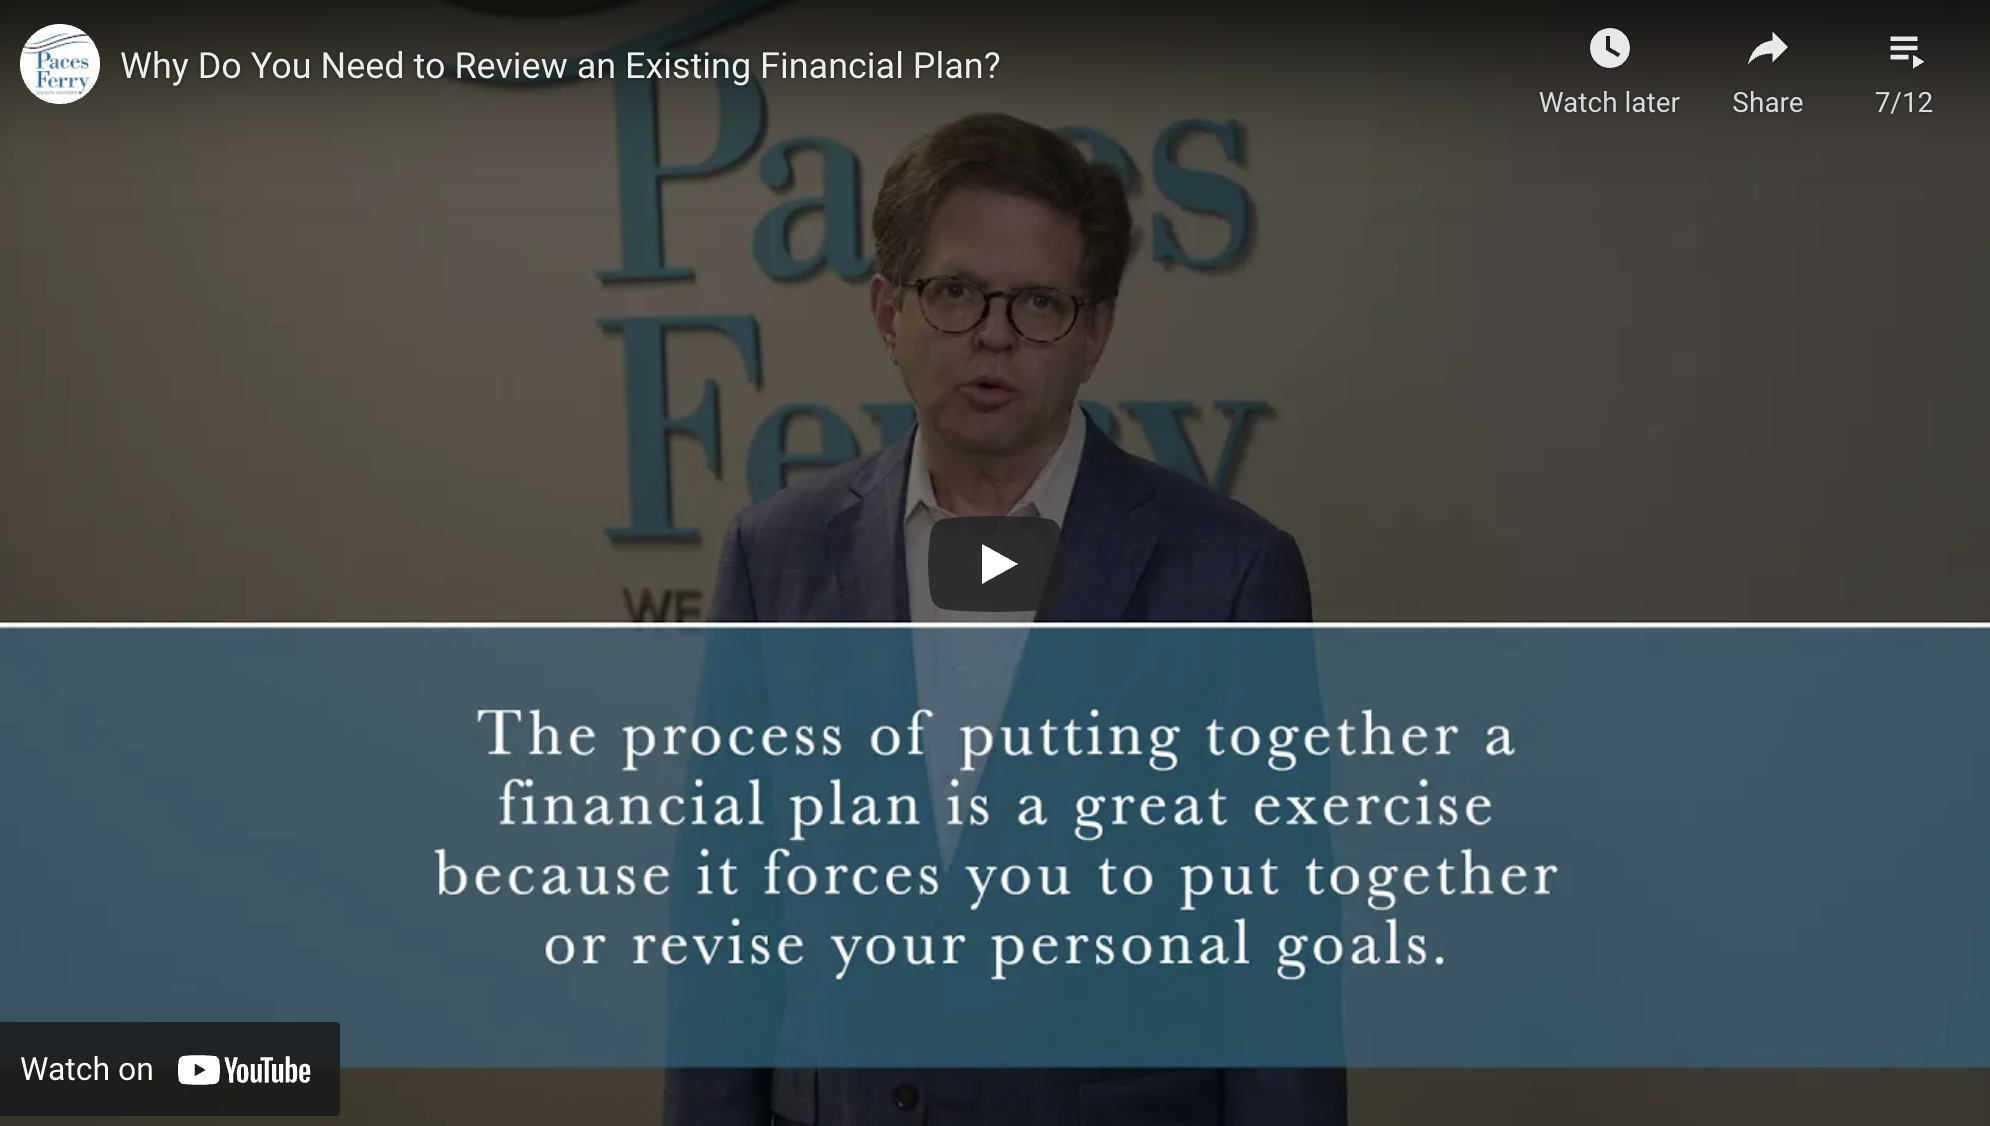  Why Do You Need to Review an Existing Financial Plan?